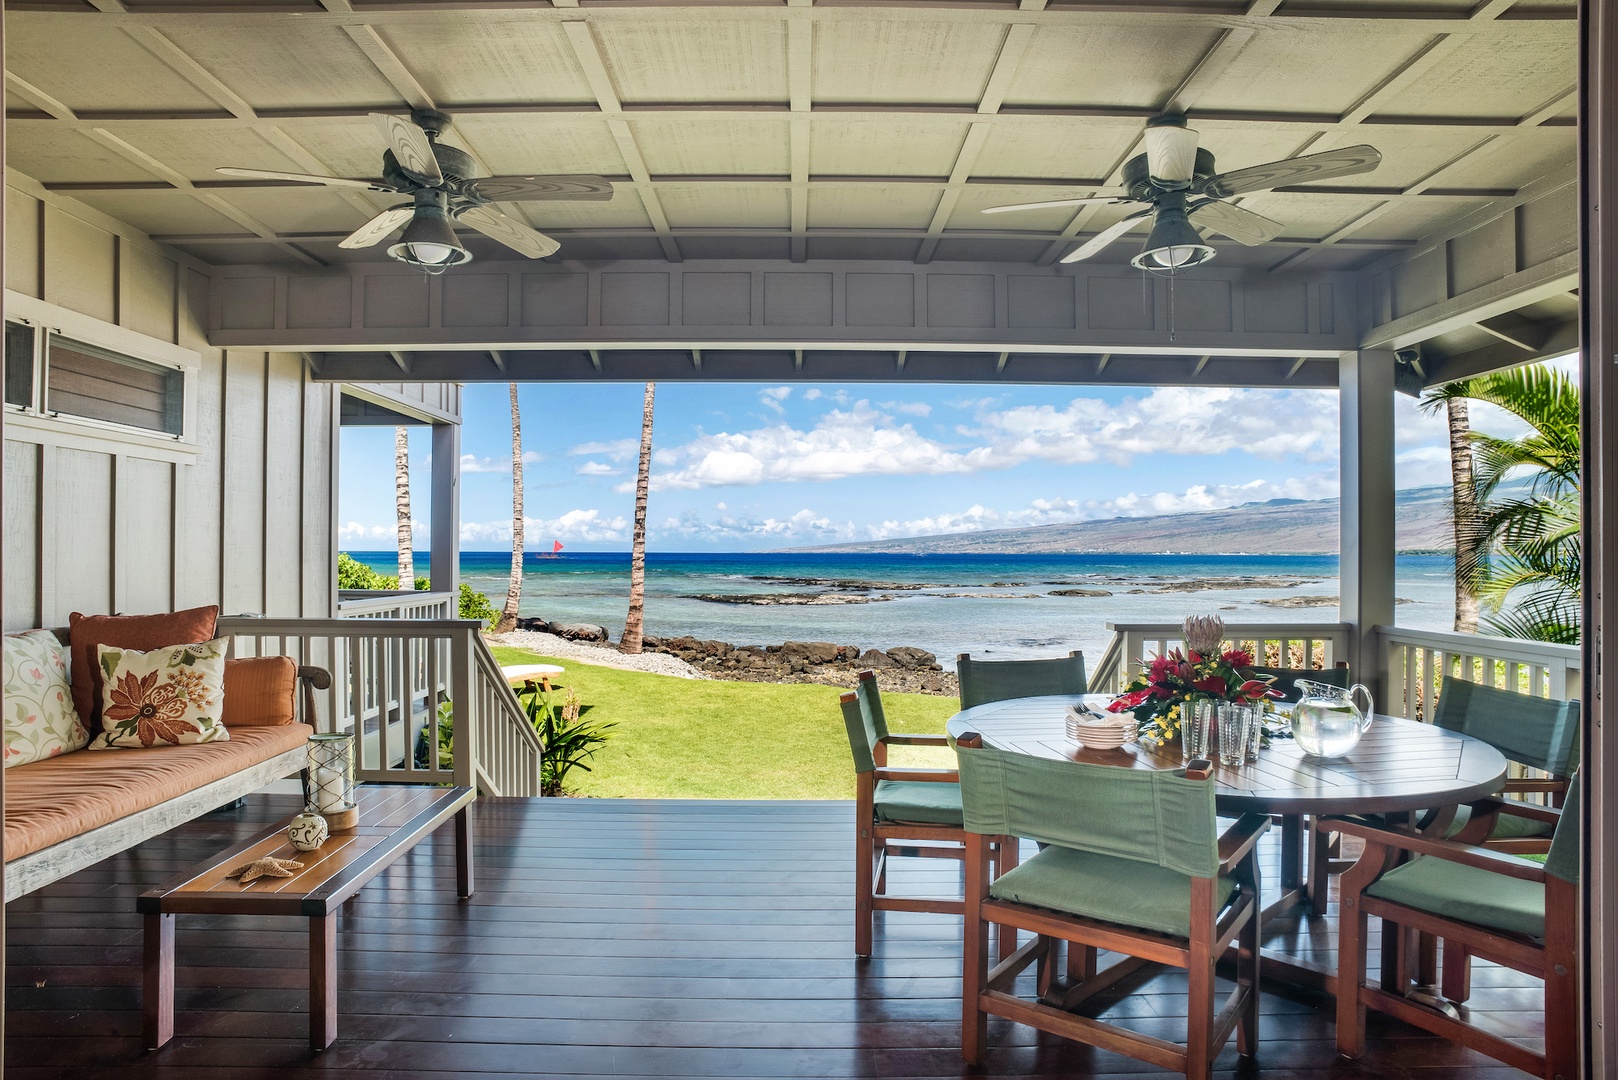 Kamuela Vacation Rentals, 3BD Estate Home at Puako Bay (10D) - Main Lanai Off Living Room w/ Dining and Lounging Options, Just a Few Steps to the Shore!